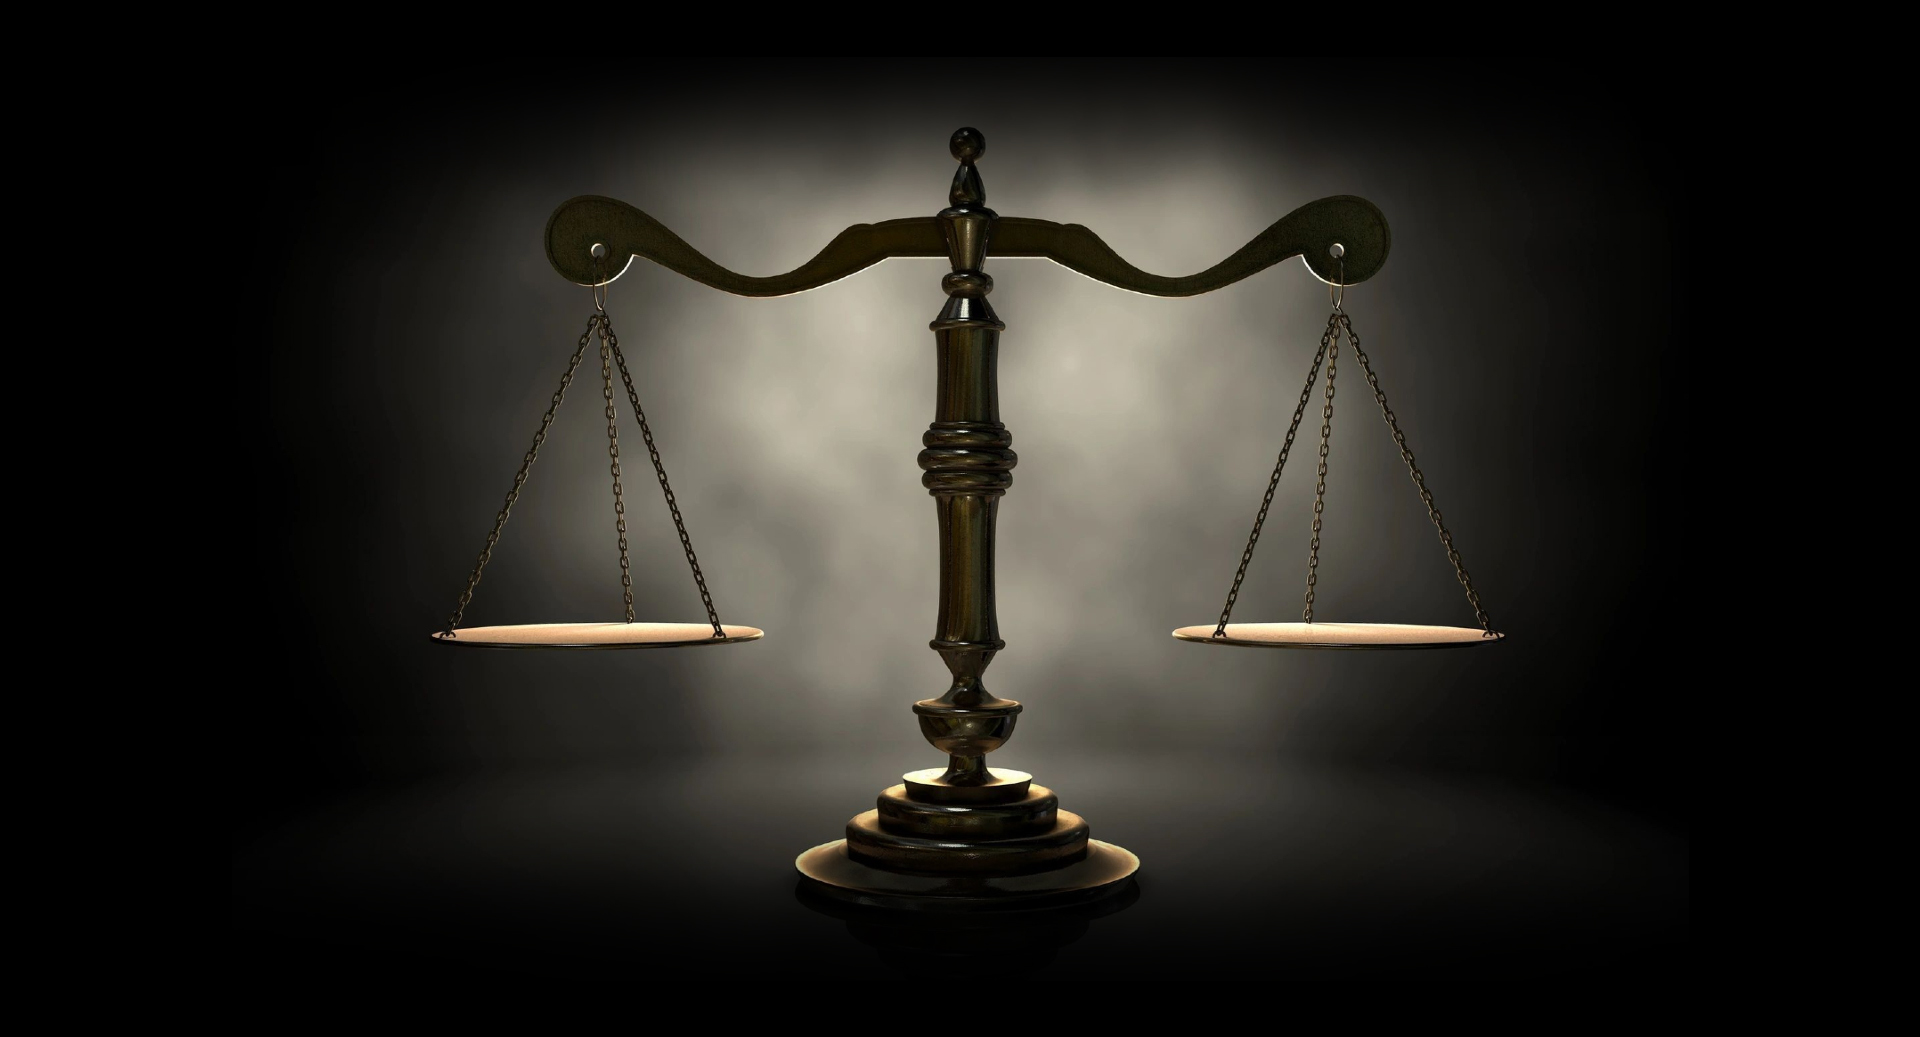 Balanced justice scales on a table with a dark background